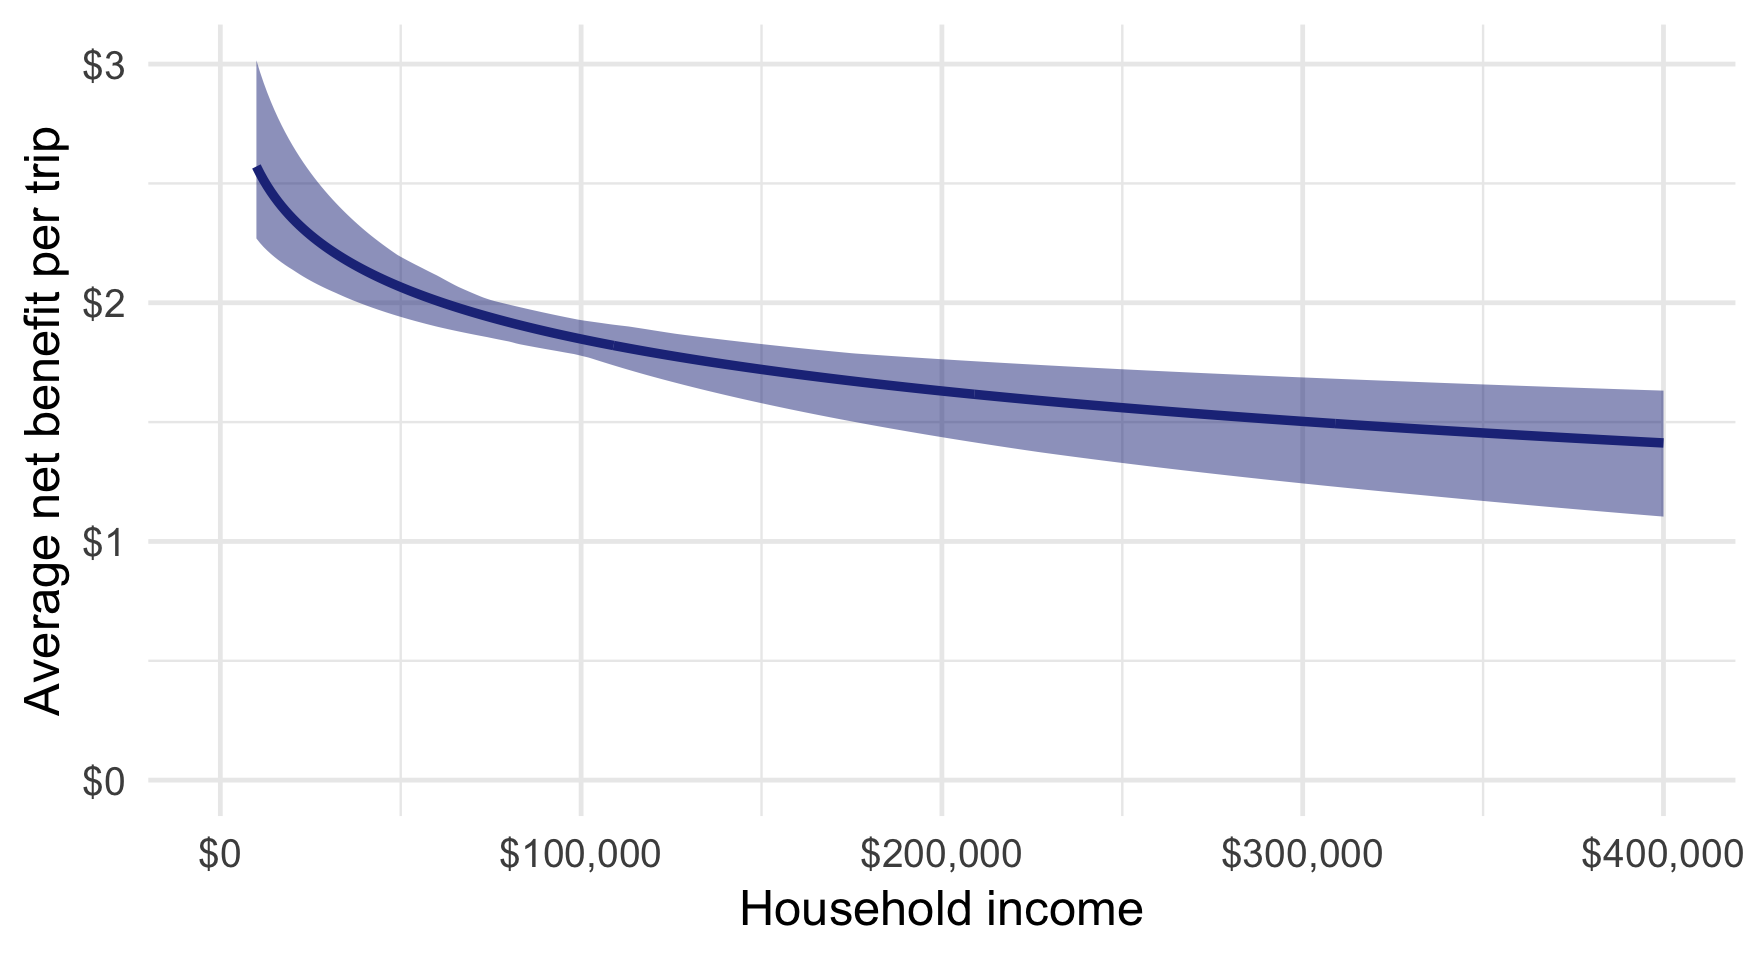 Net benefit per trip, by income